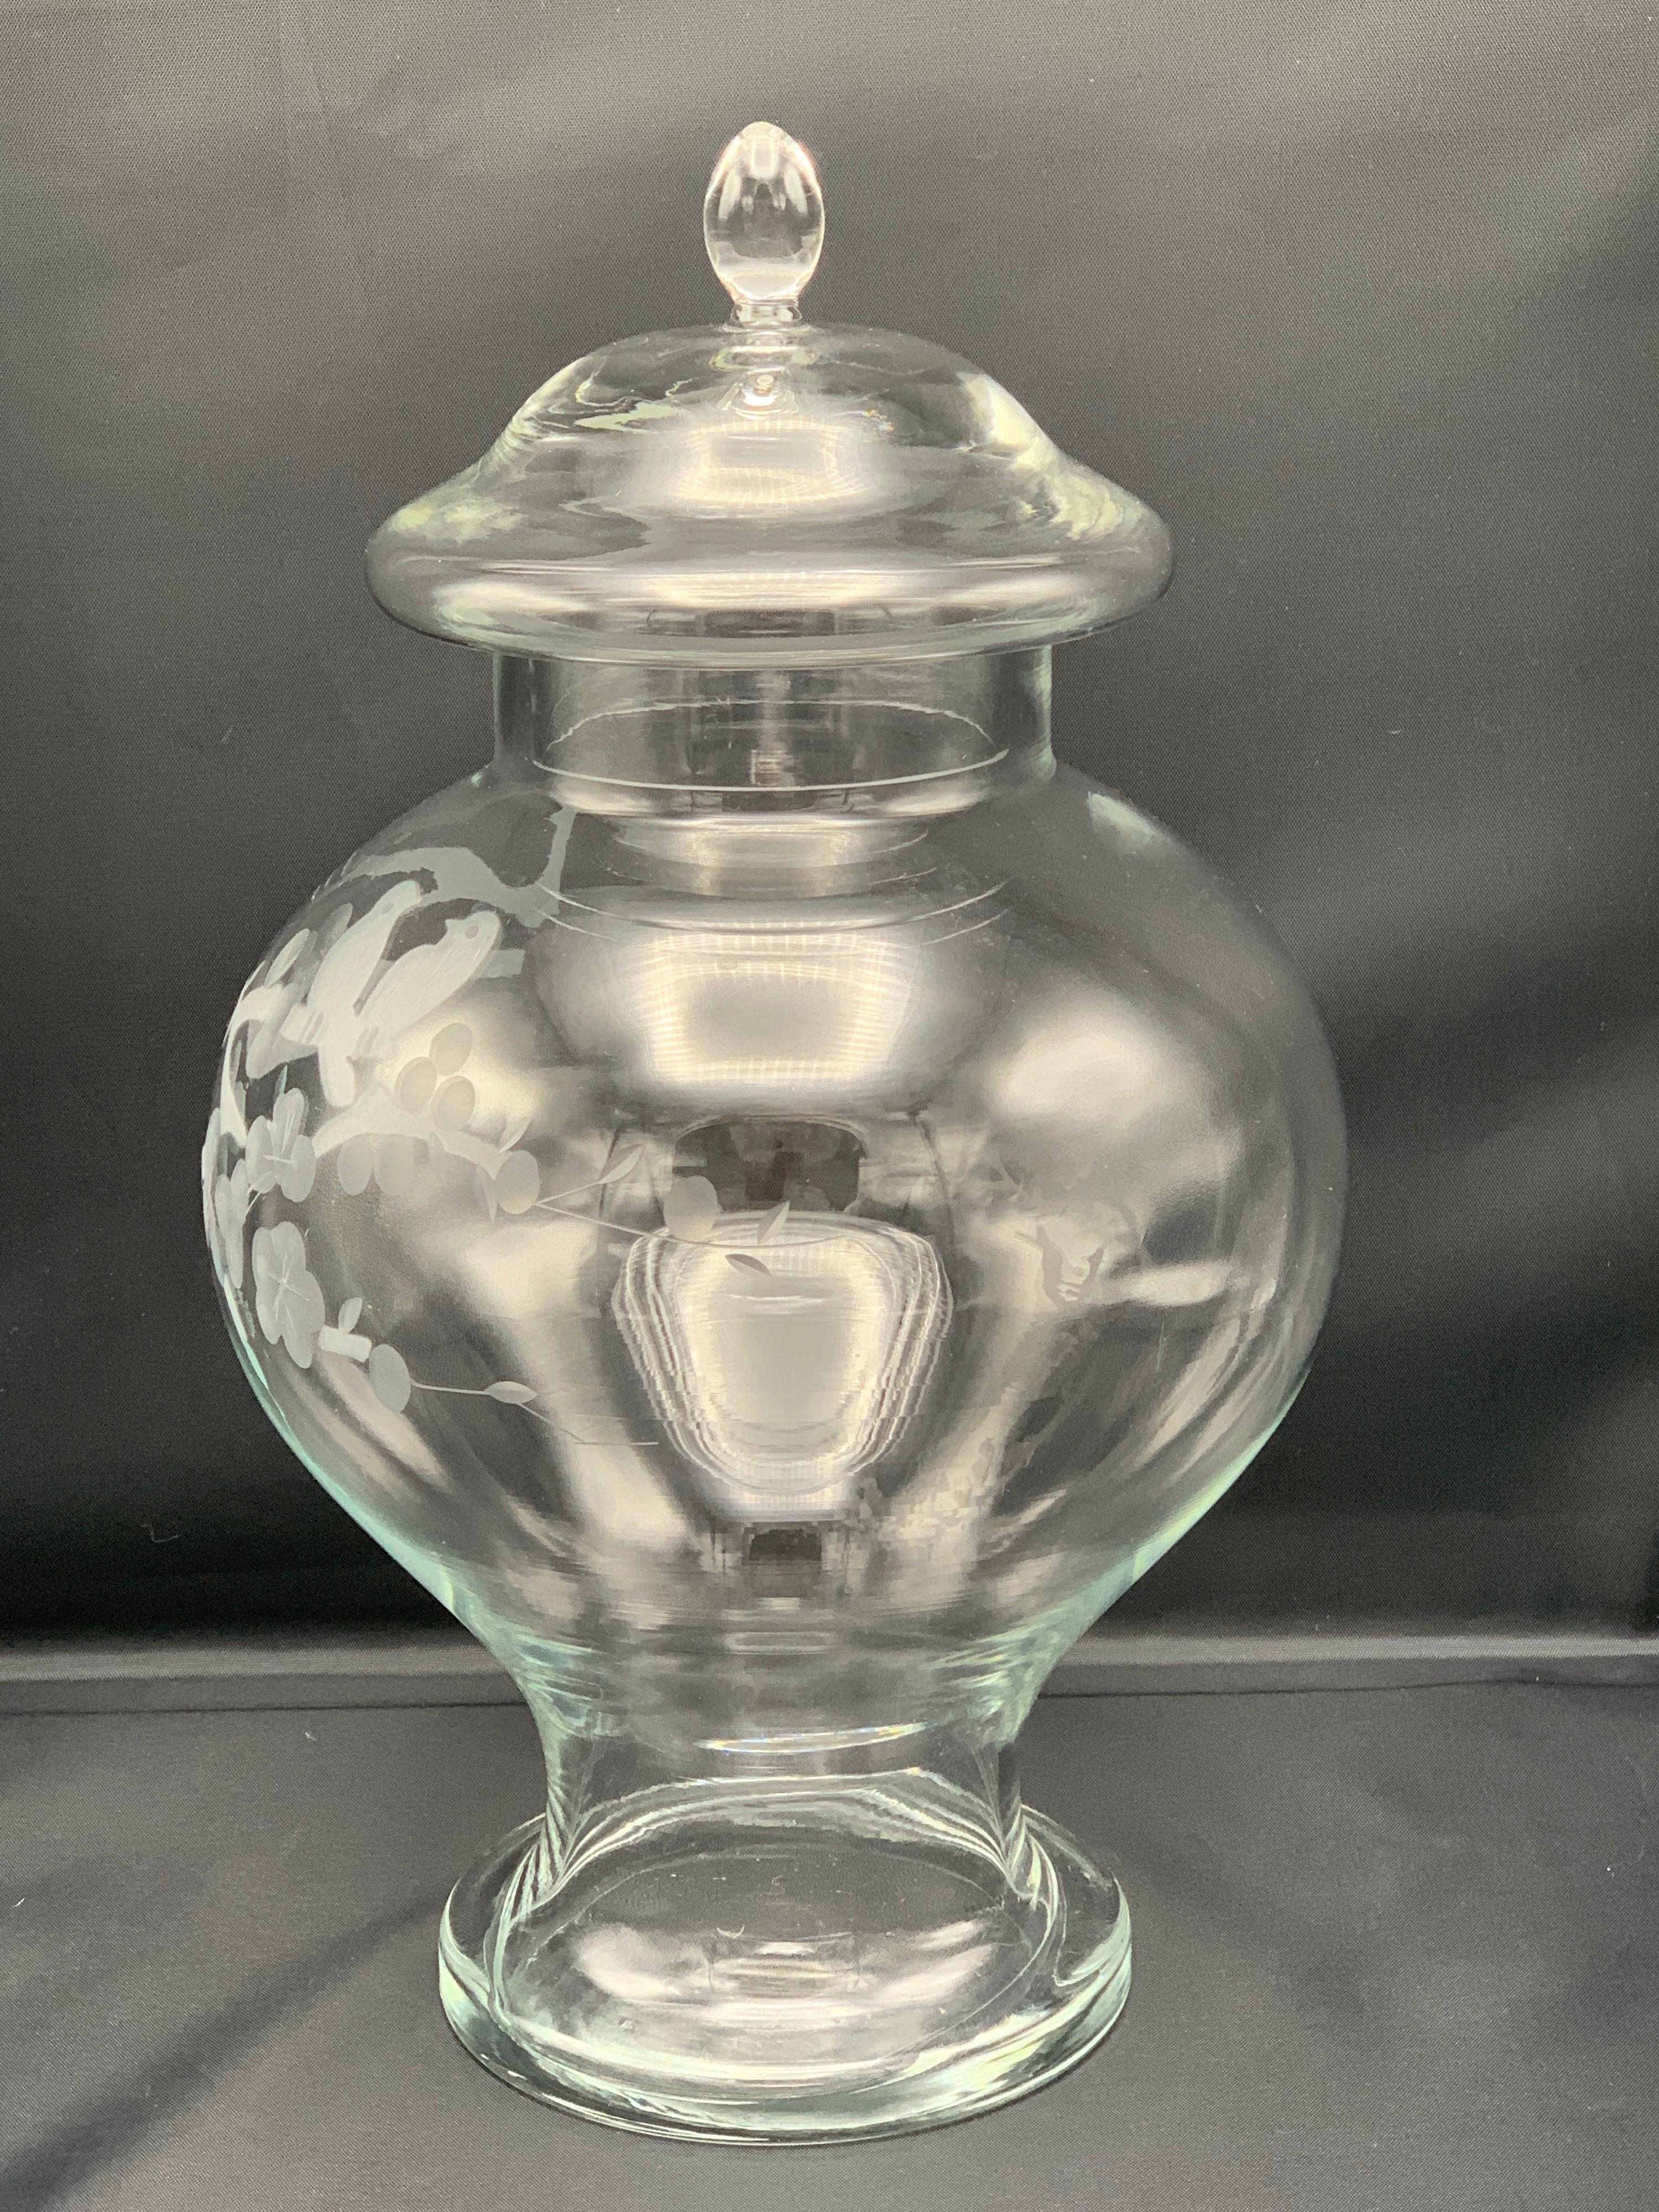 Offered is a gorgeous and rare, 1950s glass ginger jar. This exquisite piece has an ornate scene of a cherry blossom branch and bird motif hand-etched along the front side. Removable lid. Stunning condition, with no chips, cracks, or major